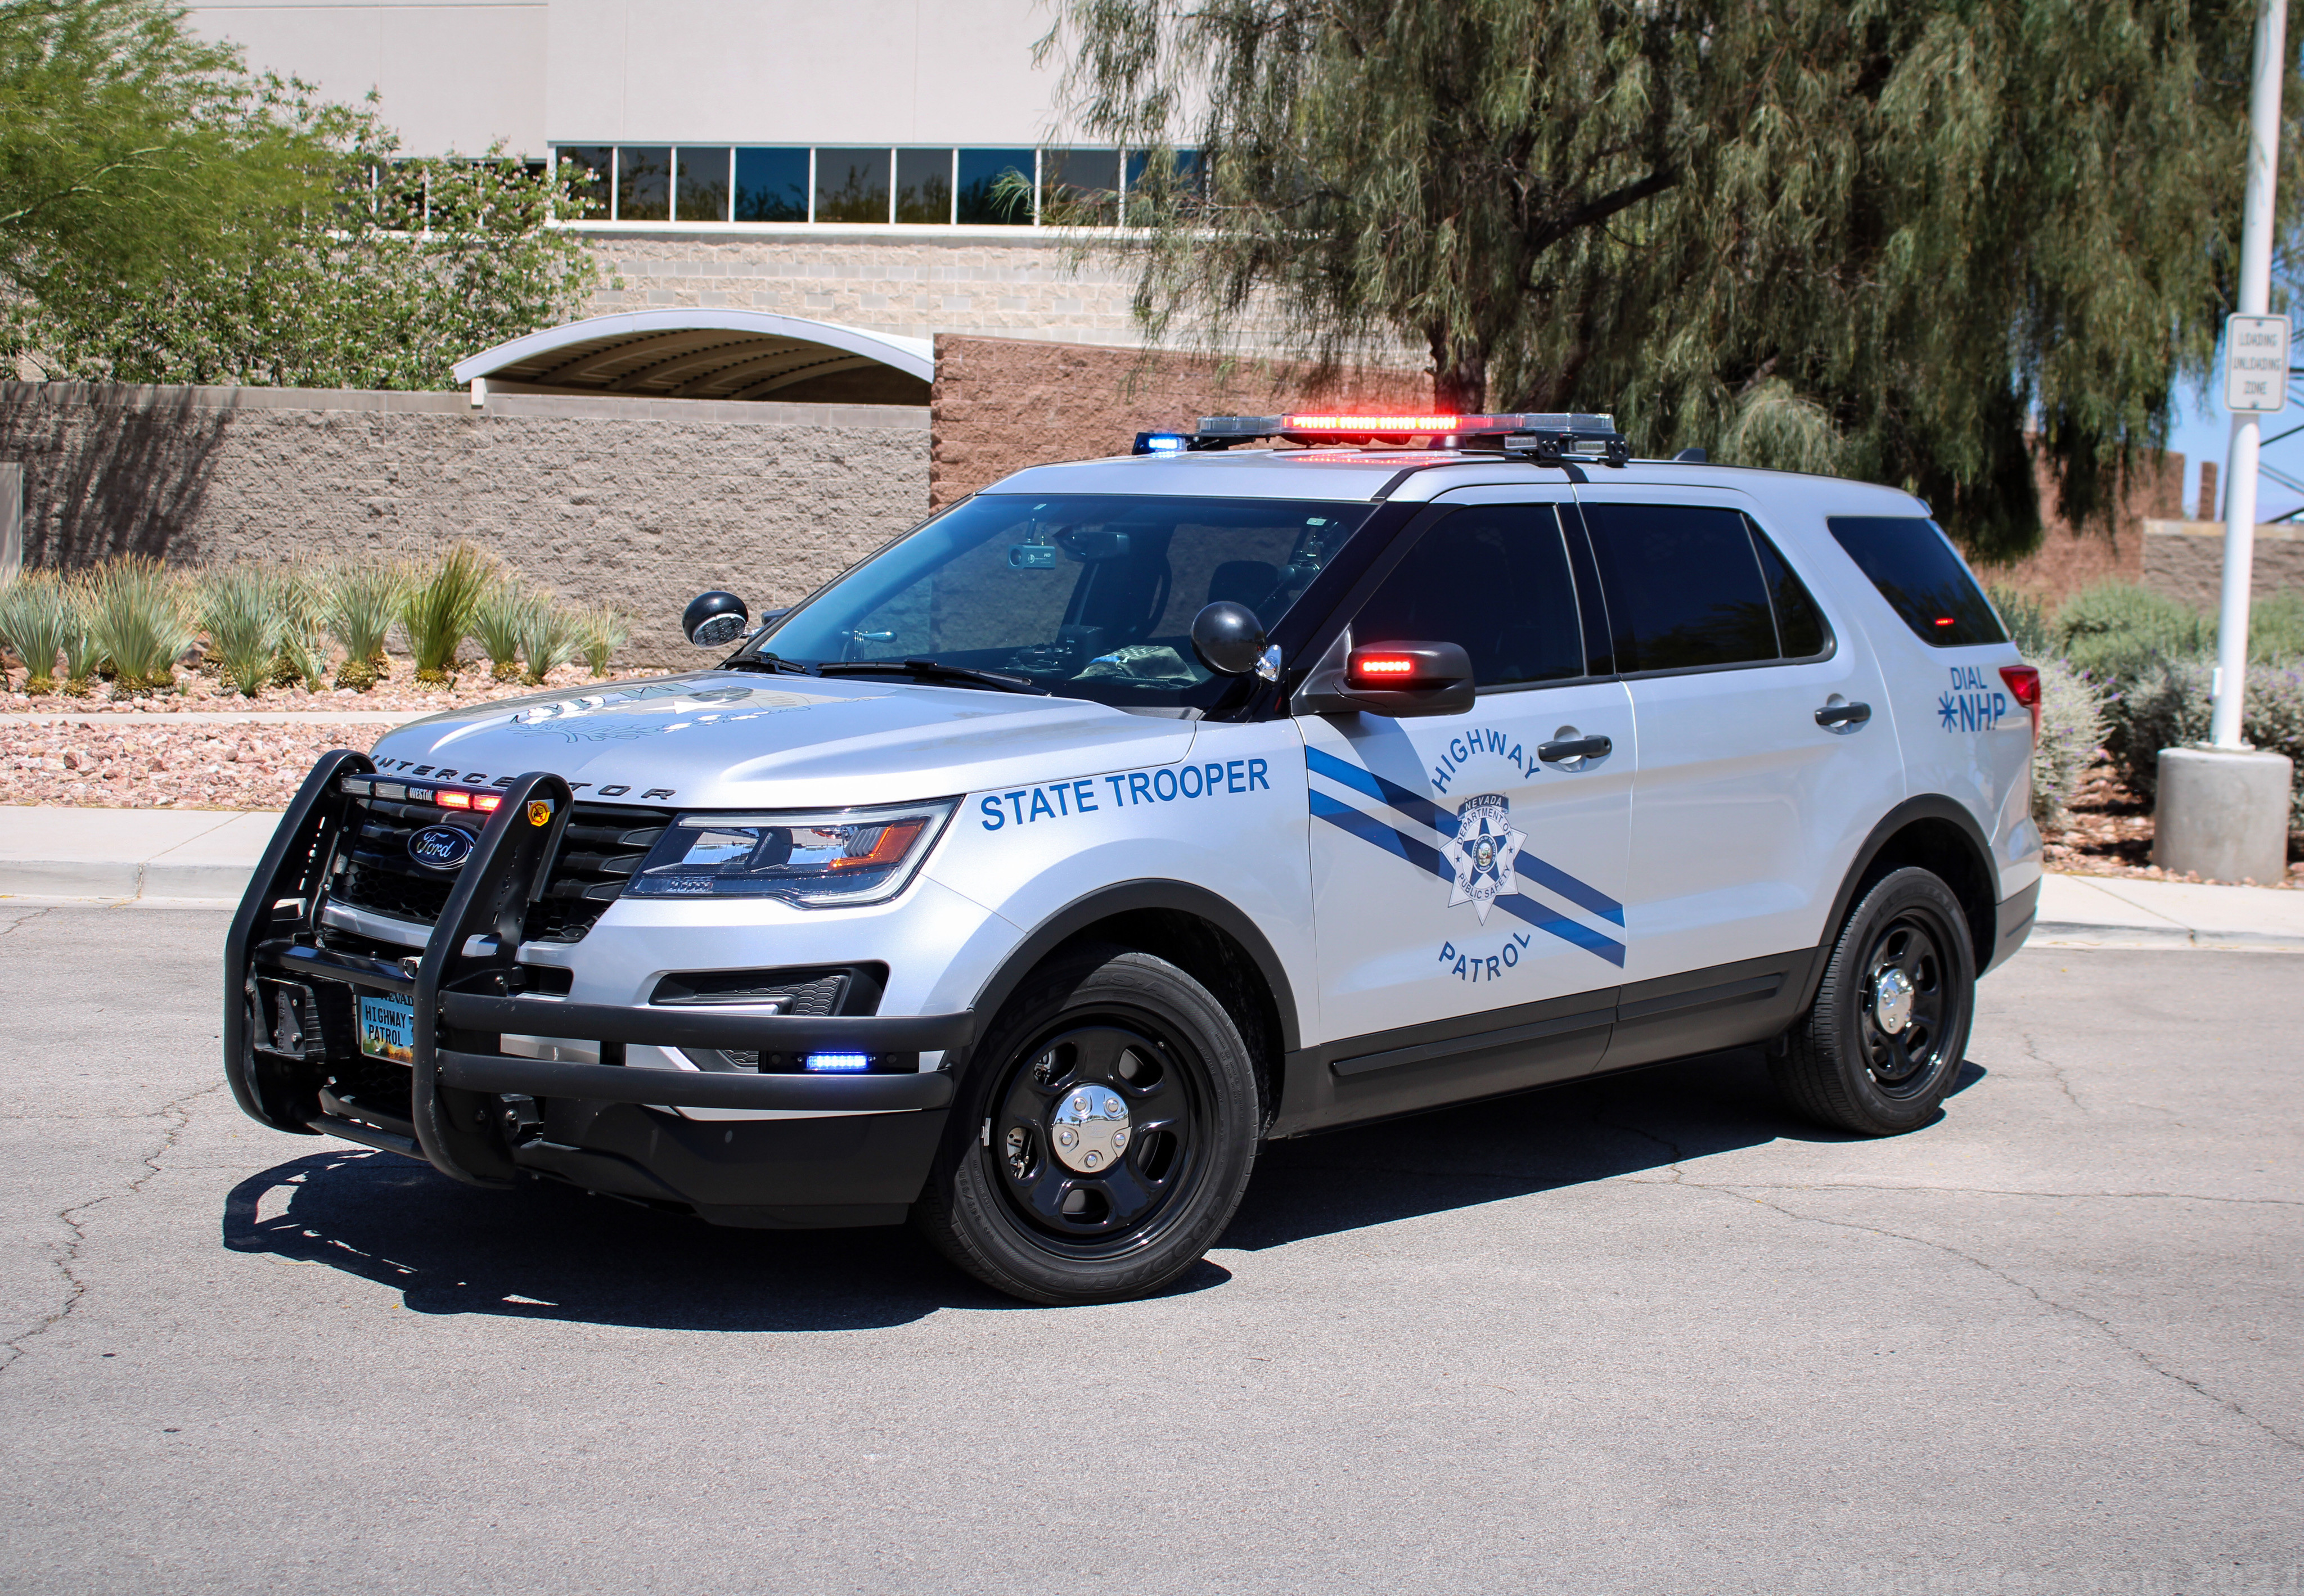 A photo  of Nevada State Police Highway Patrol
            Cruiser 329, a 2016-2019 Ford Police Interceptor Utility             taken by Nicholas You